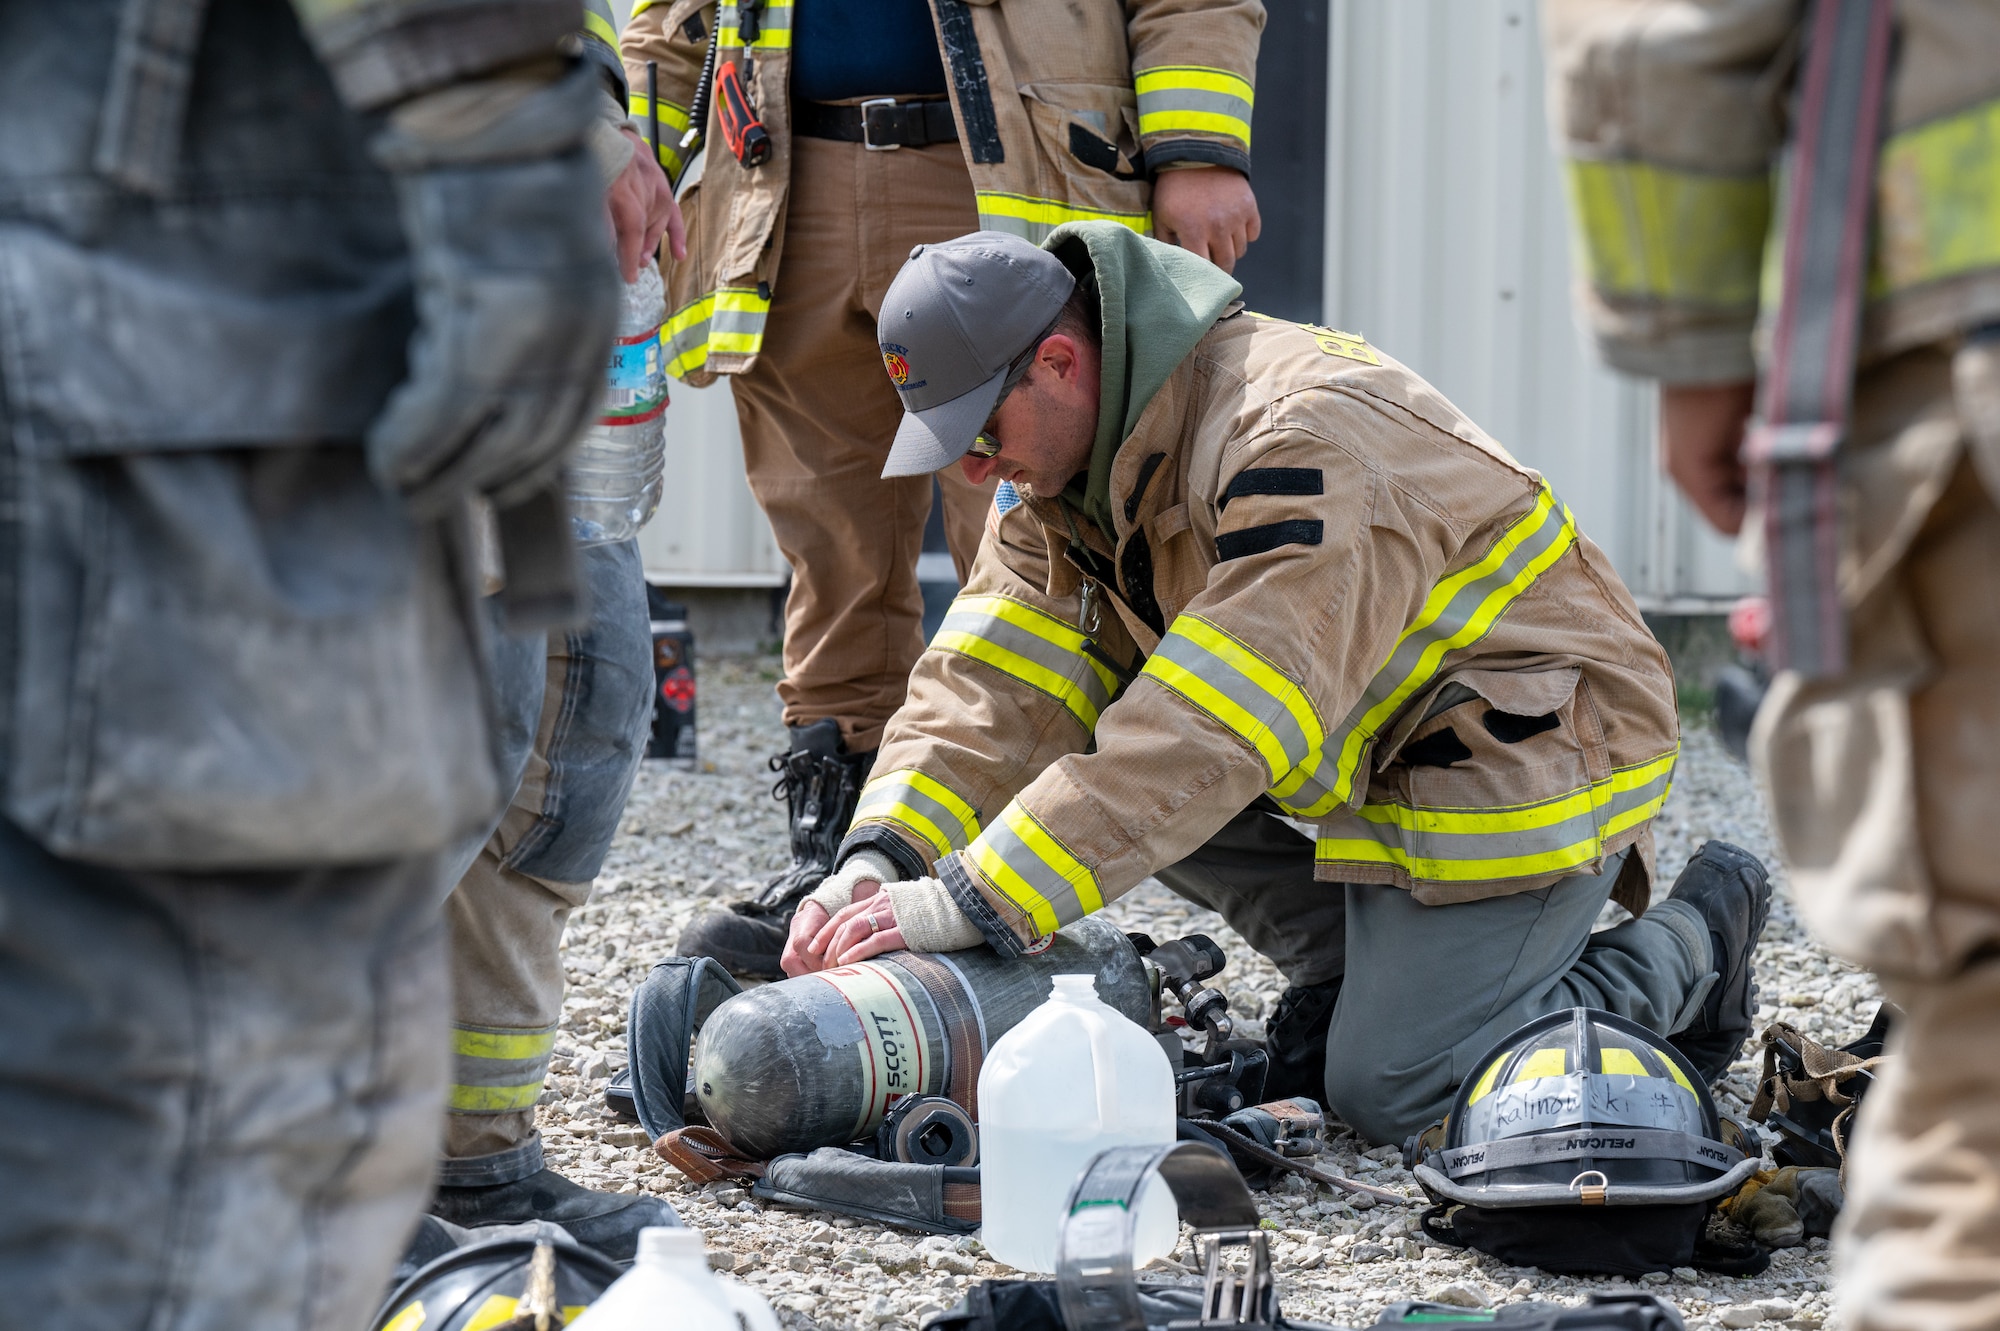 A man with both knees on the ground, leaning over a firefighter's oxygen tank and making adjustments to it with his hands.